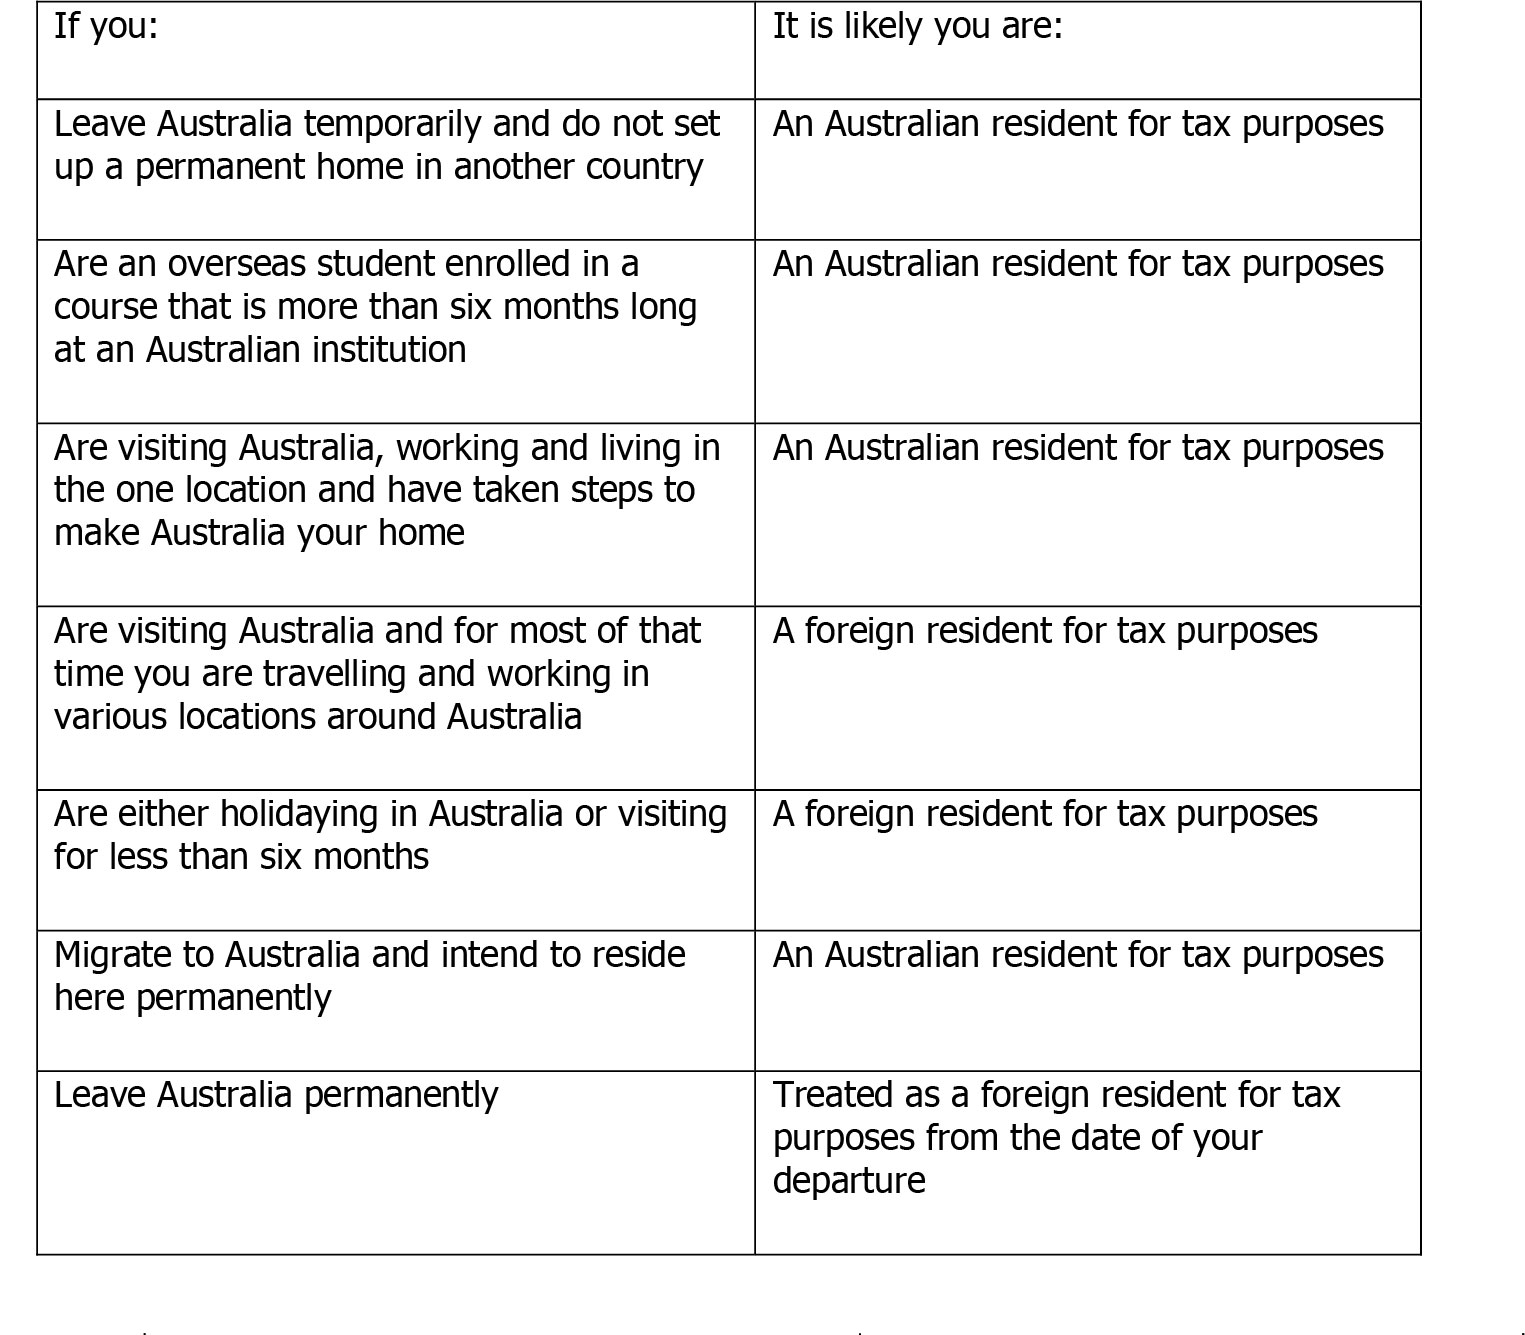 are-you-an-australian-resident-for-tax-purposes-and-what-are-the